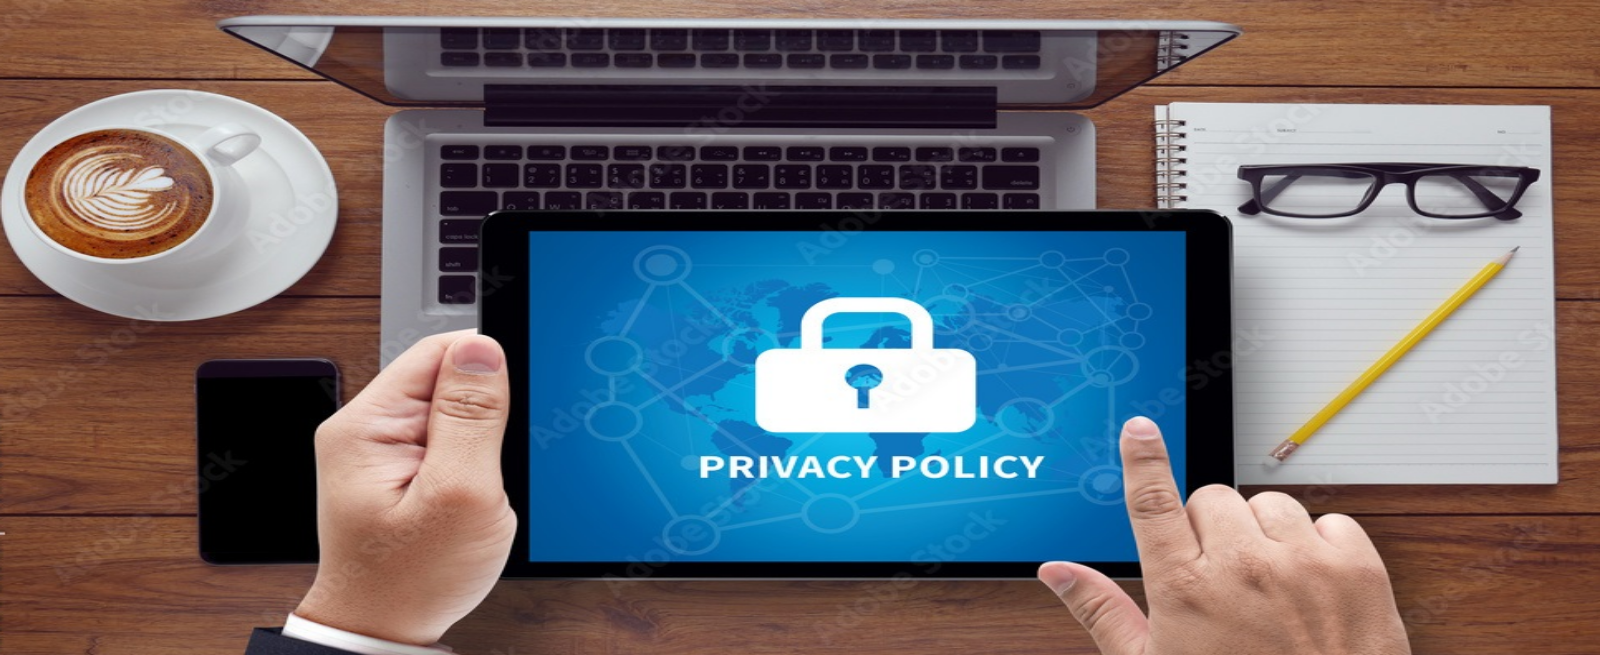 online privacy policy with computer and tablet